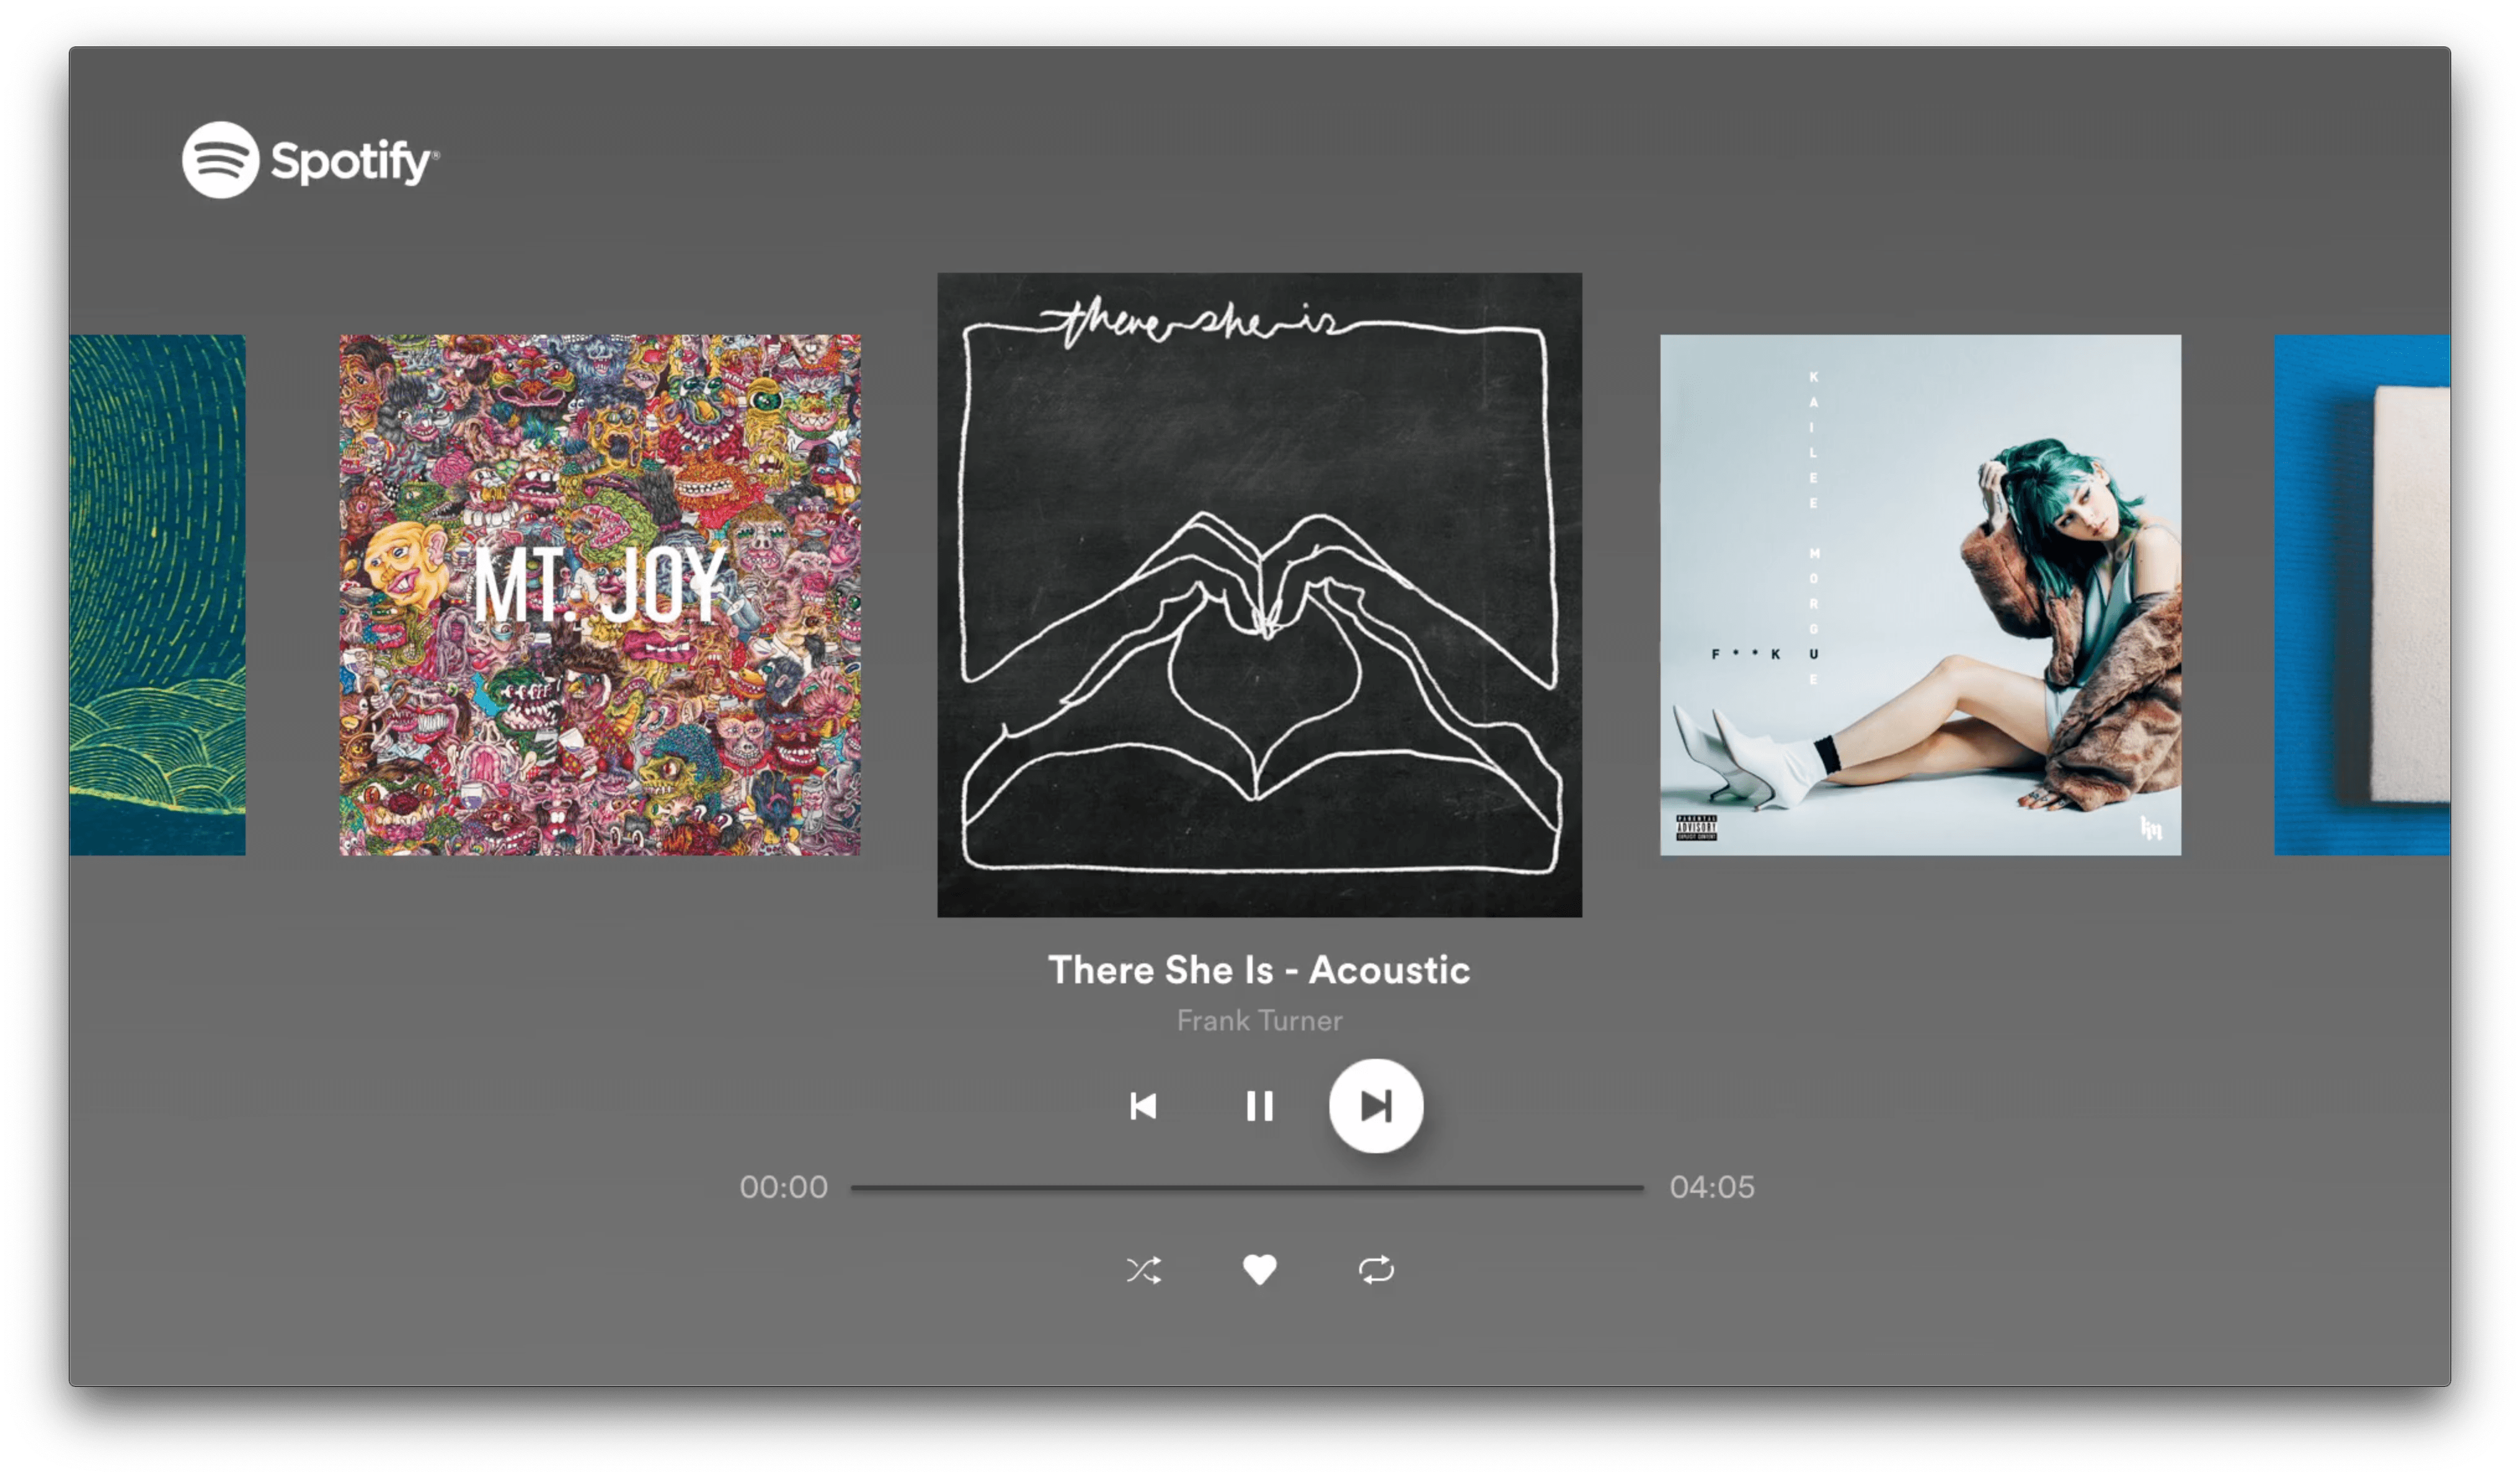 Spotify's Apple TV UI will be familiar to iOS users.